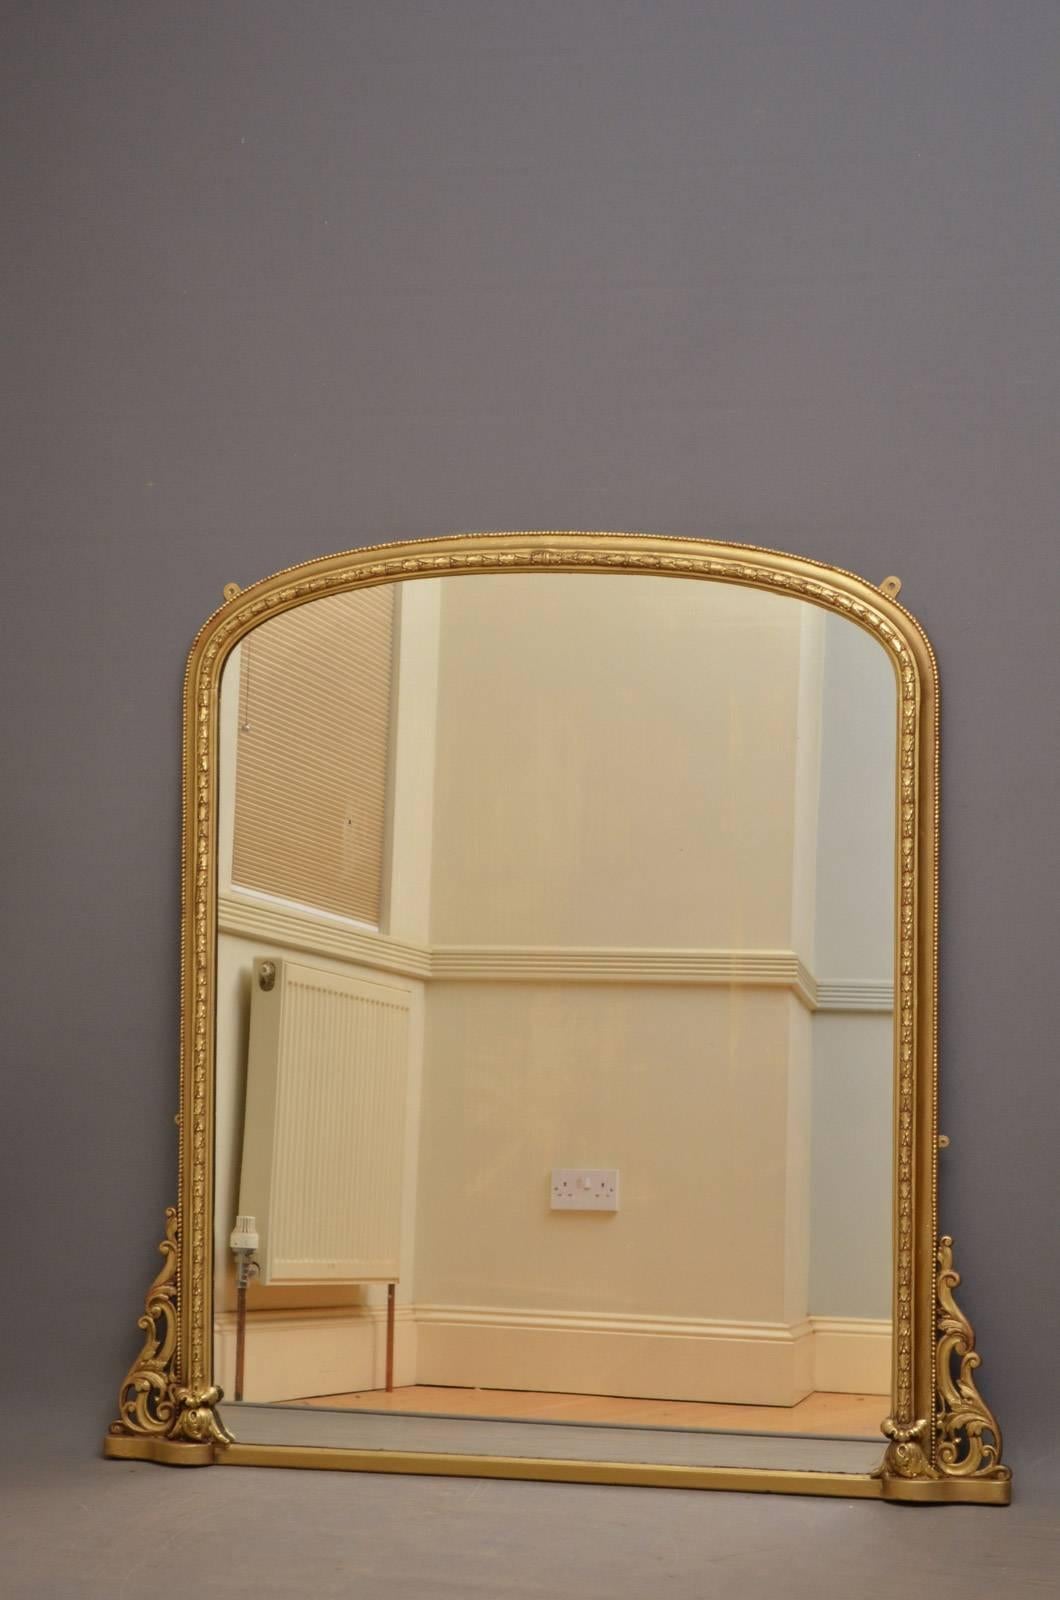 K0284 excellent English, Victorian gilt mirror, having original mirror plate in carved and moulded frame with fine scroll carvings to sides. This Victorian overmantle, wall mirror has been refinished in the past and is in wonderful condition